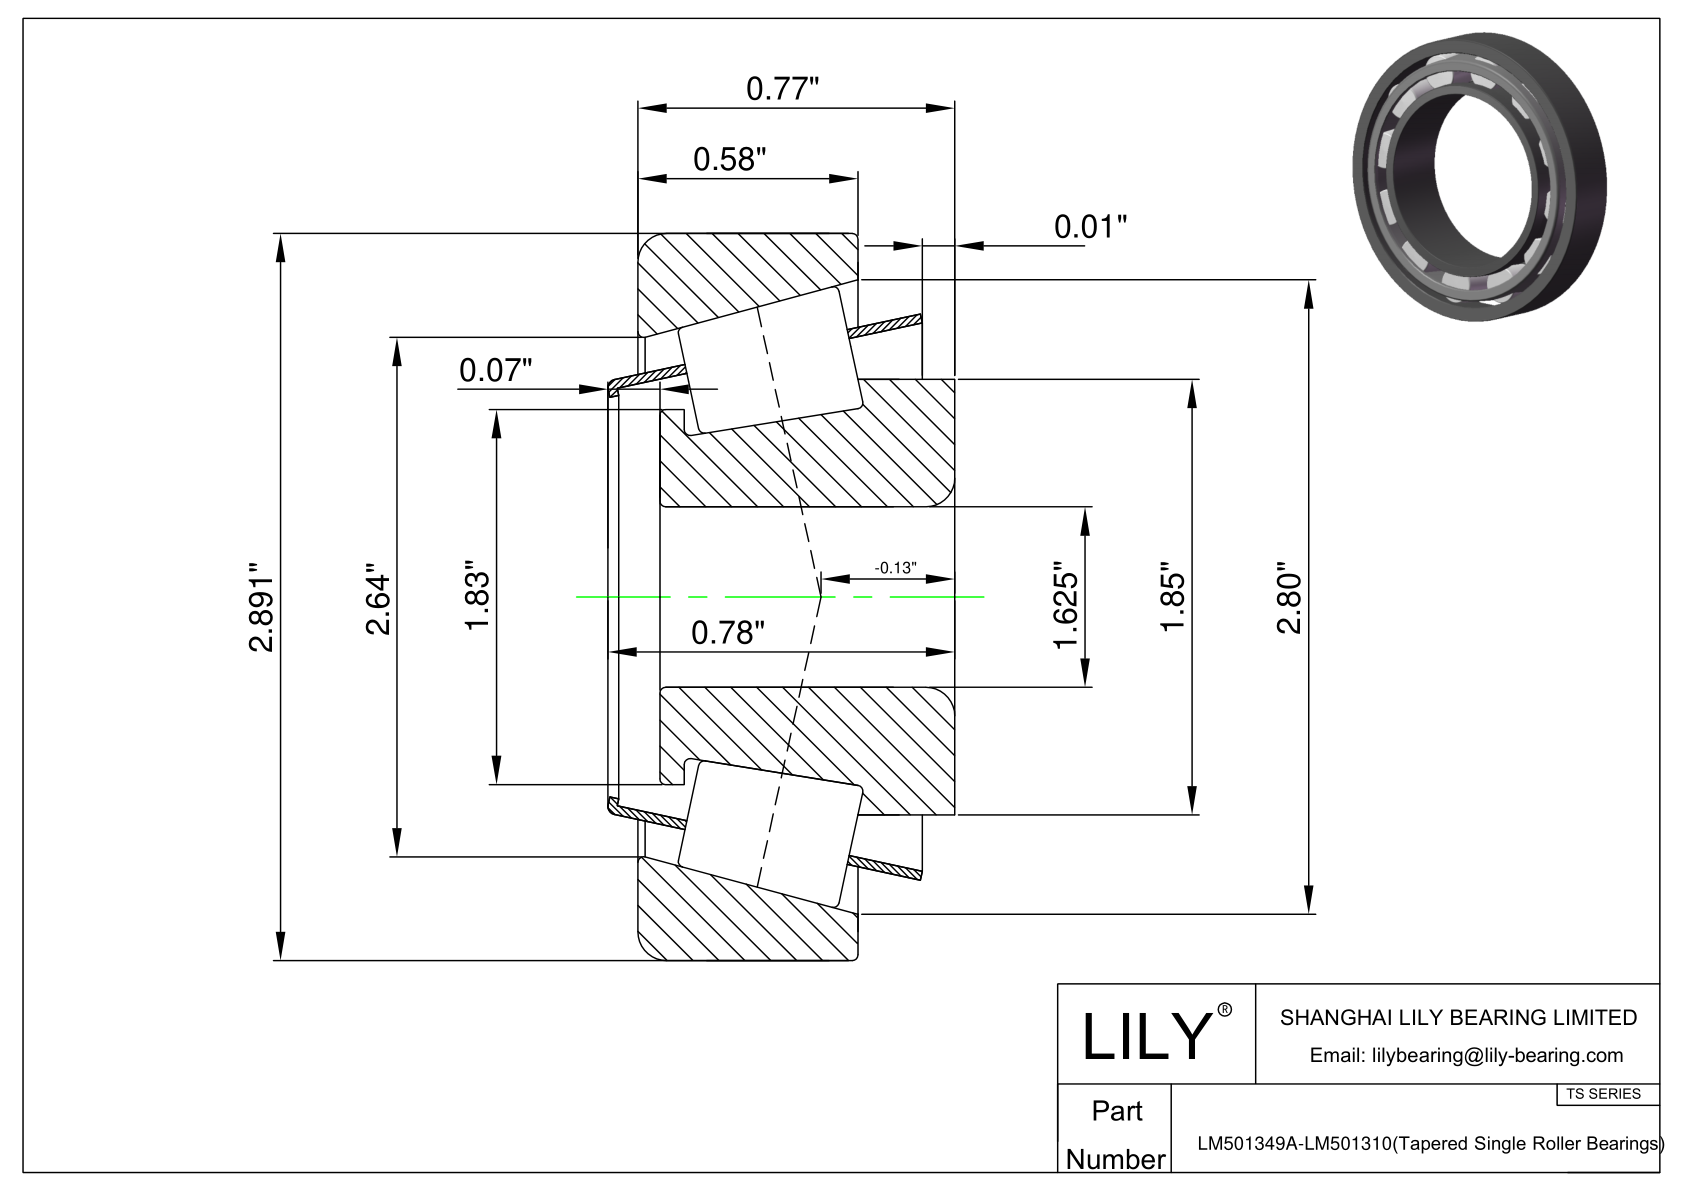 LM501349A-LM501310 TS (Tapered Single Roller Bearings) (Imperial) cad drawing